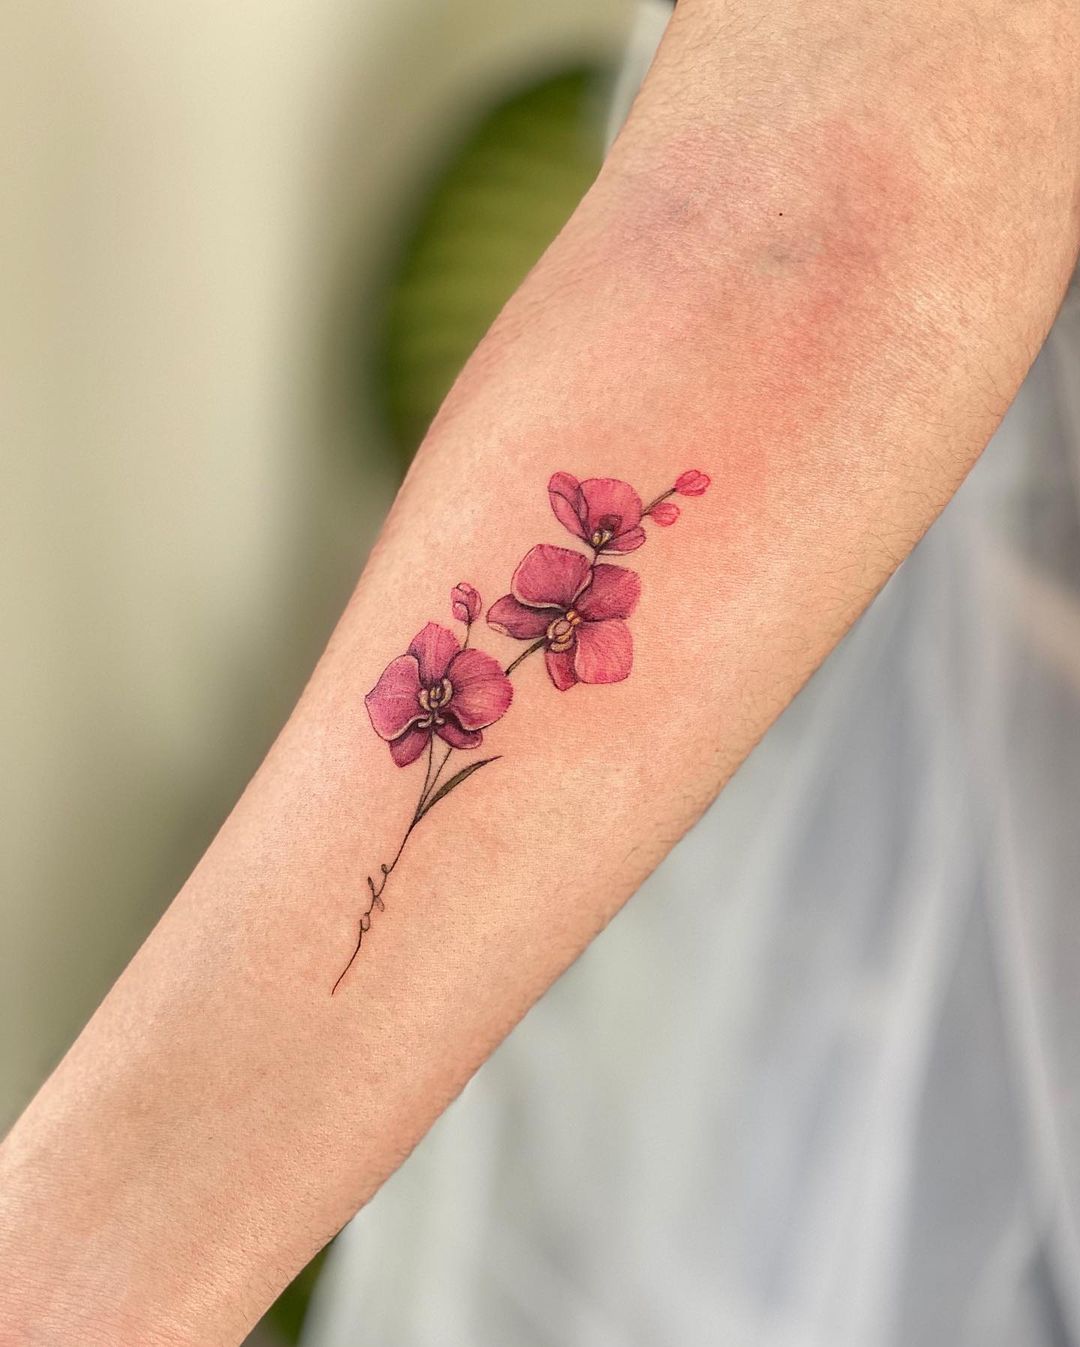 30+ Orchid Tattoos: Top Ideas & Designs, Symbolism, Meaning - 100 Tattoos